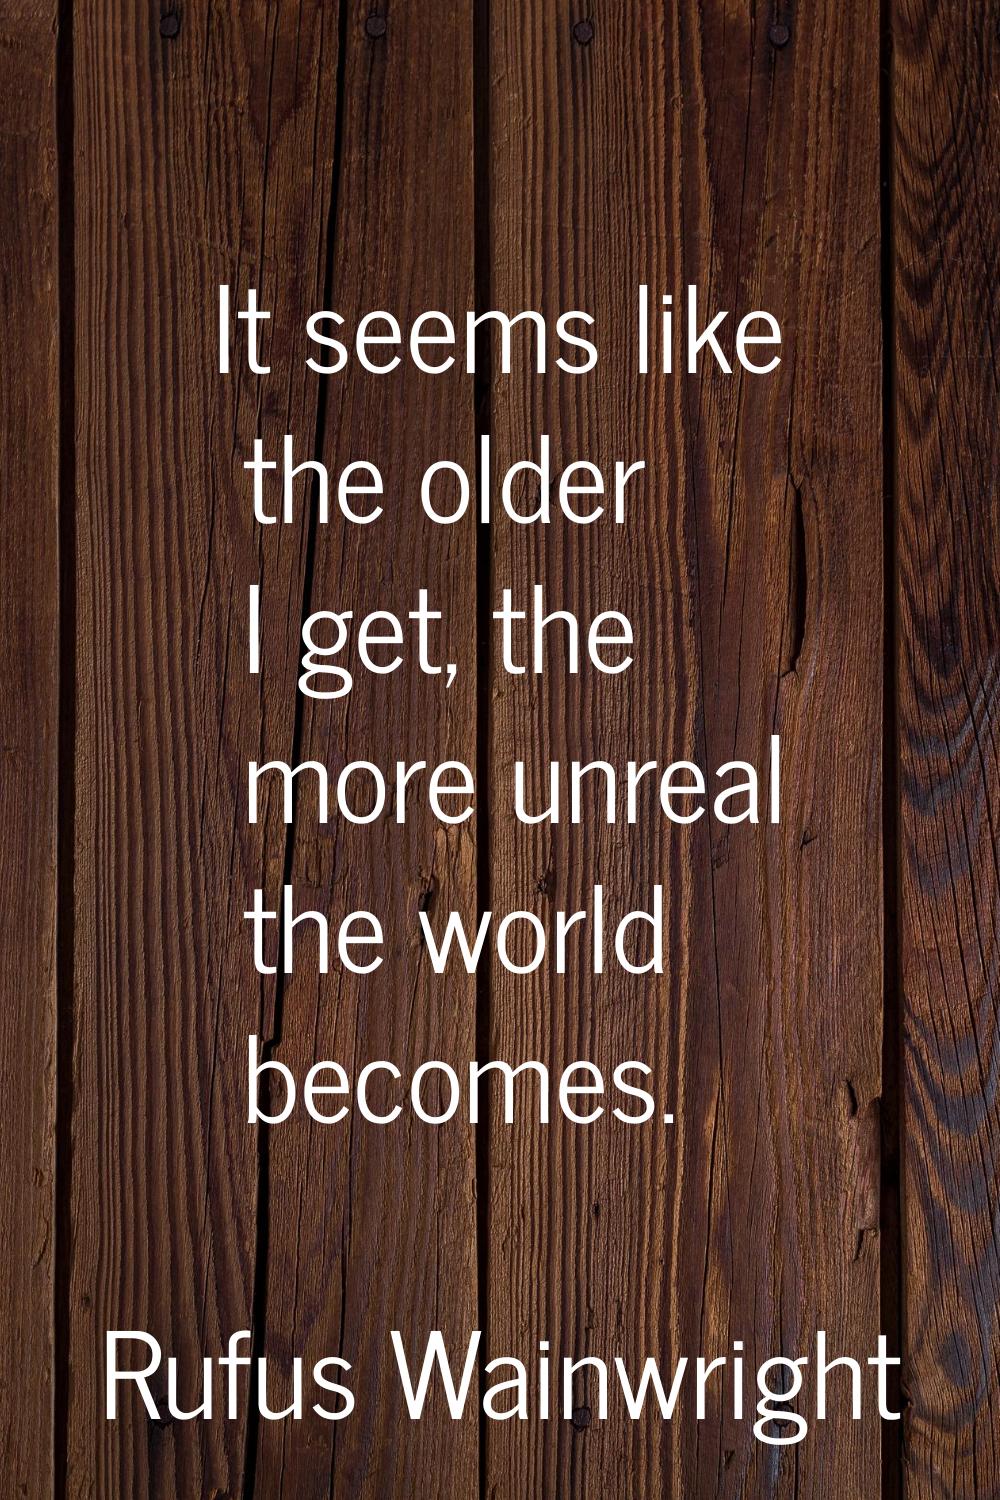 It seems like the older I get, the more unreal the world becomes.